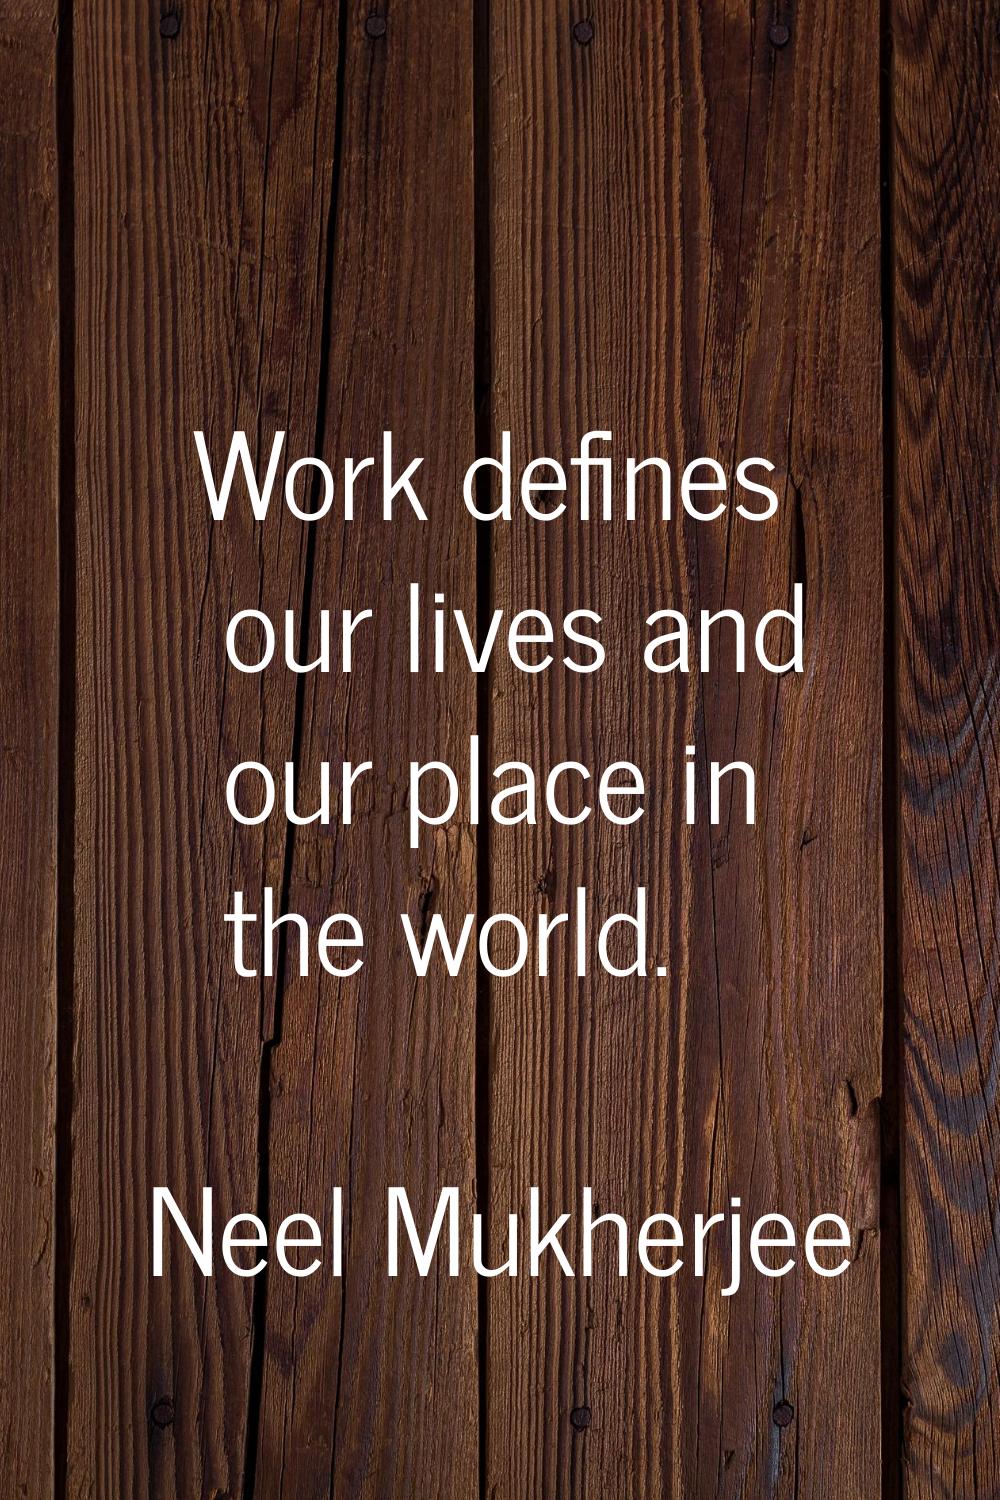 Work defines our lives and our place in the world.